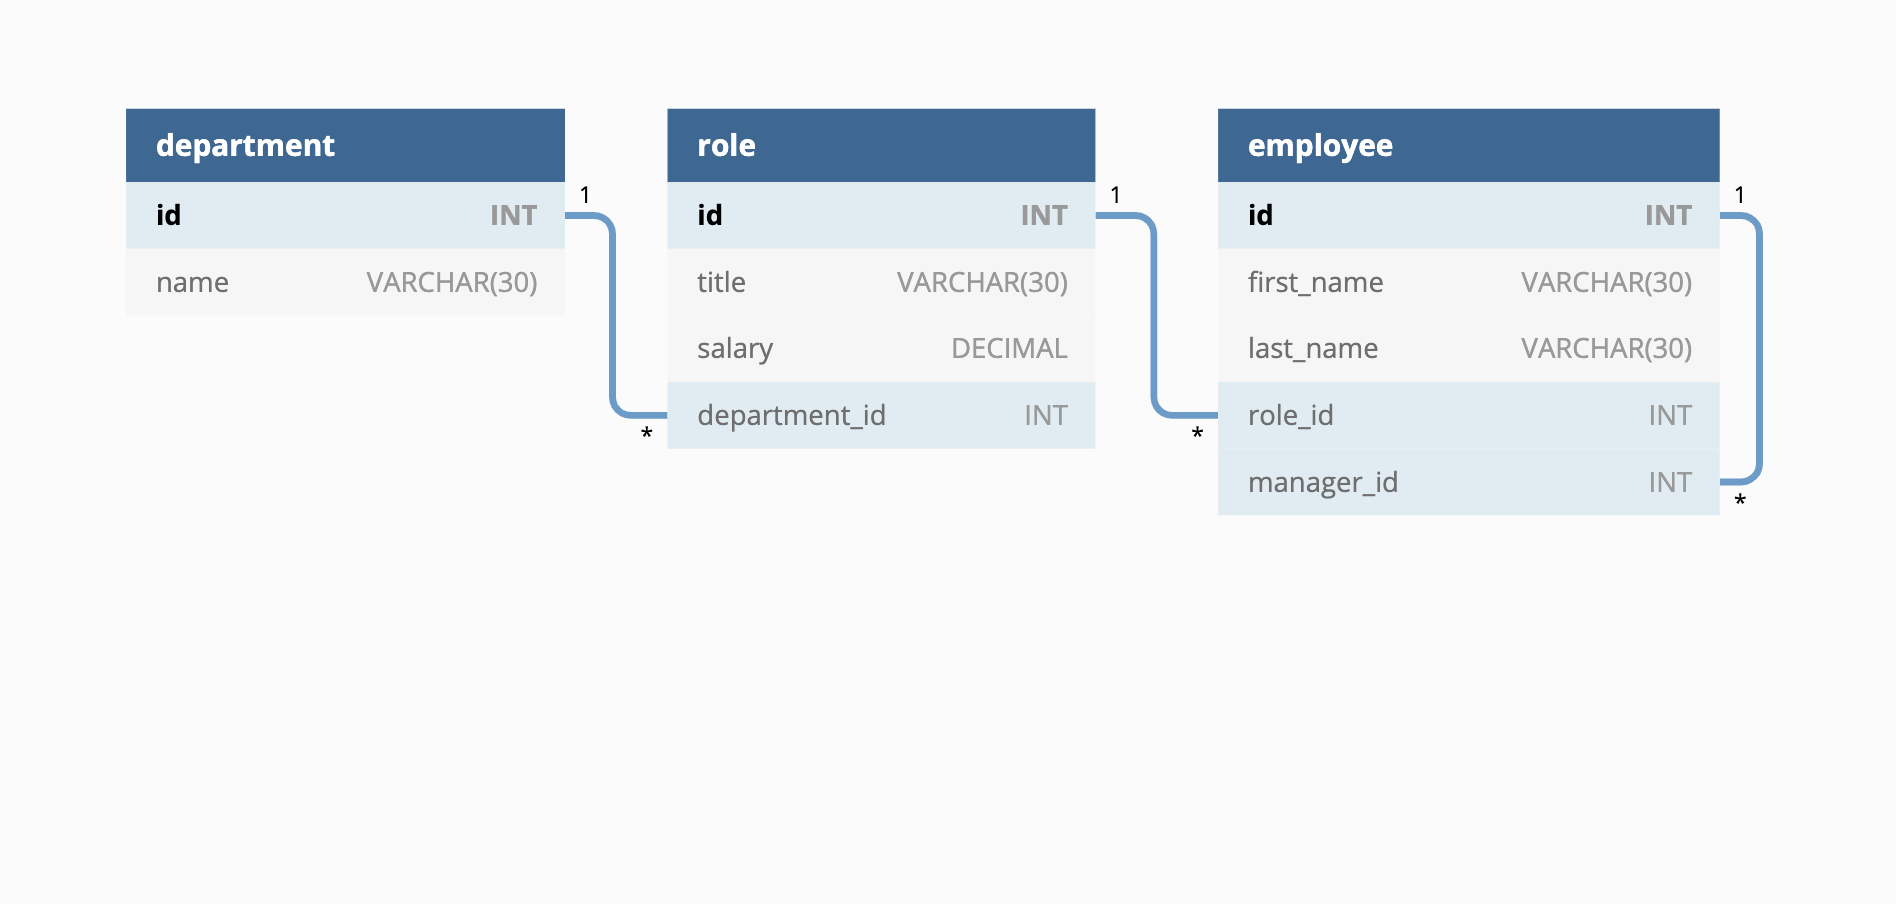 Database schema includes tables labeled “employee,” role,” and “department.”